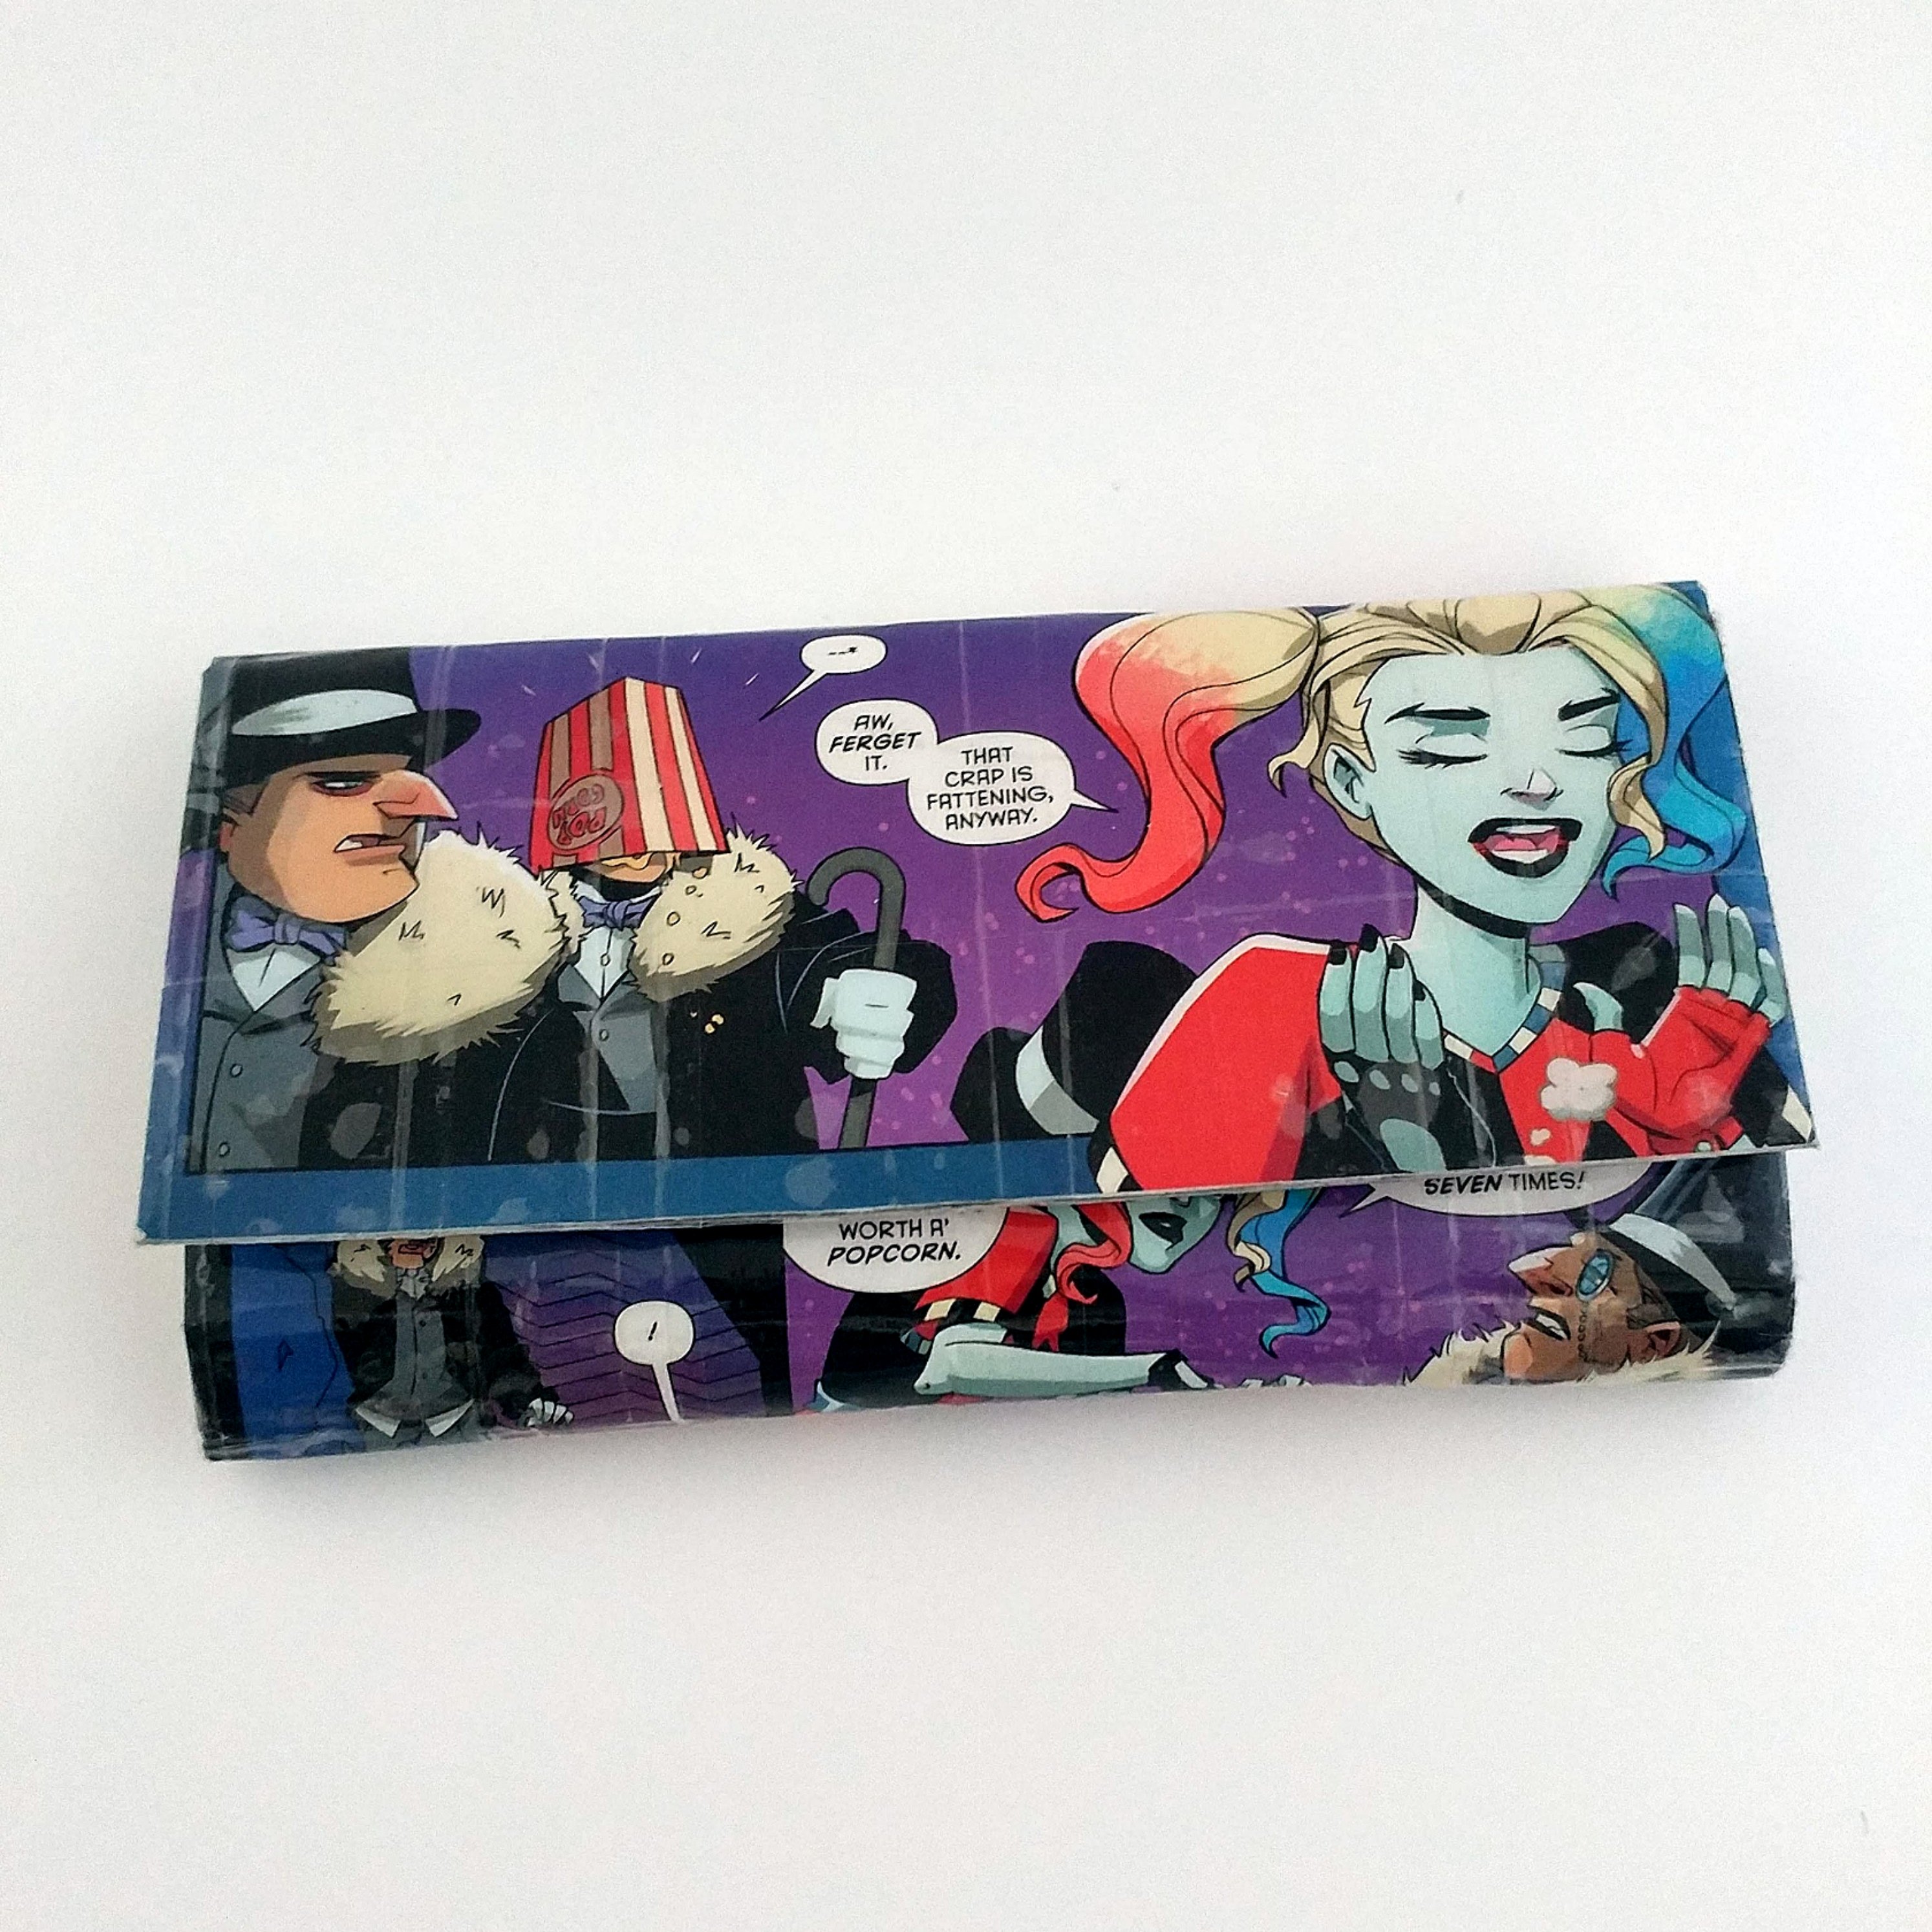 Showing Harley Quinn going to the movies on a handmade wallet create from an upcycled Harley Quinn comic book.